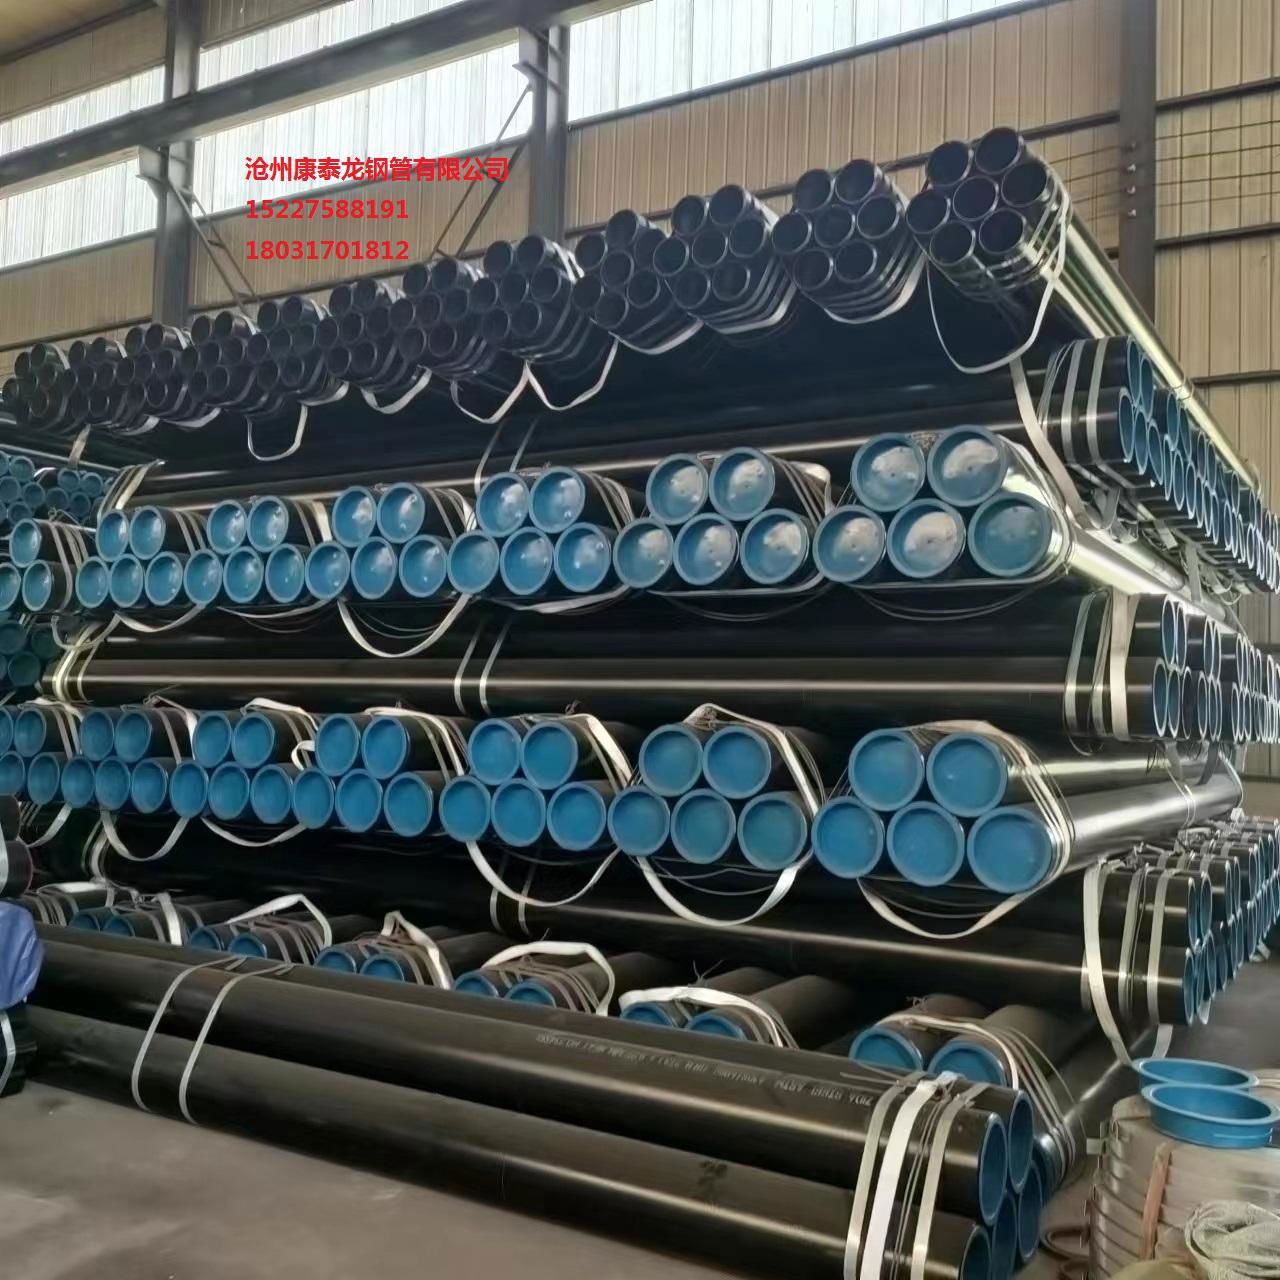 Liaocheng 20# foreign trade US standard seamless pipe 2